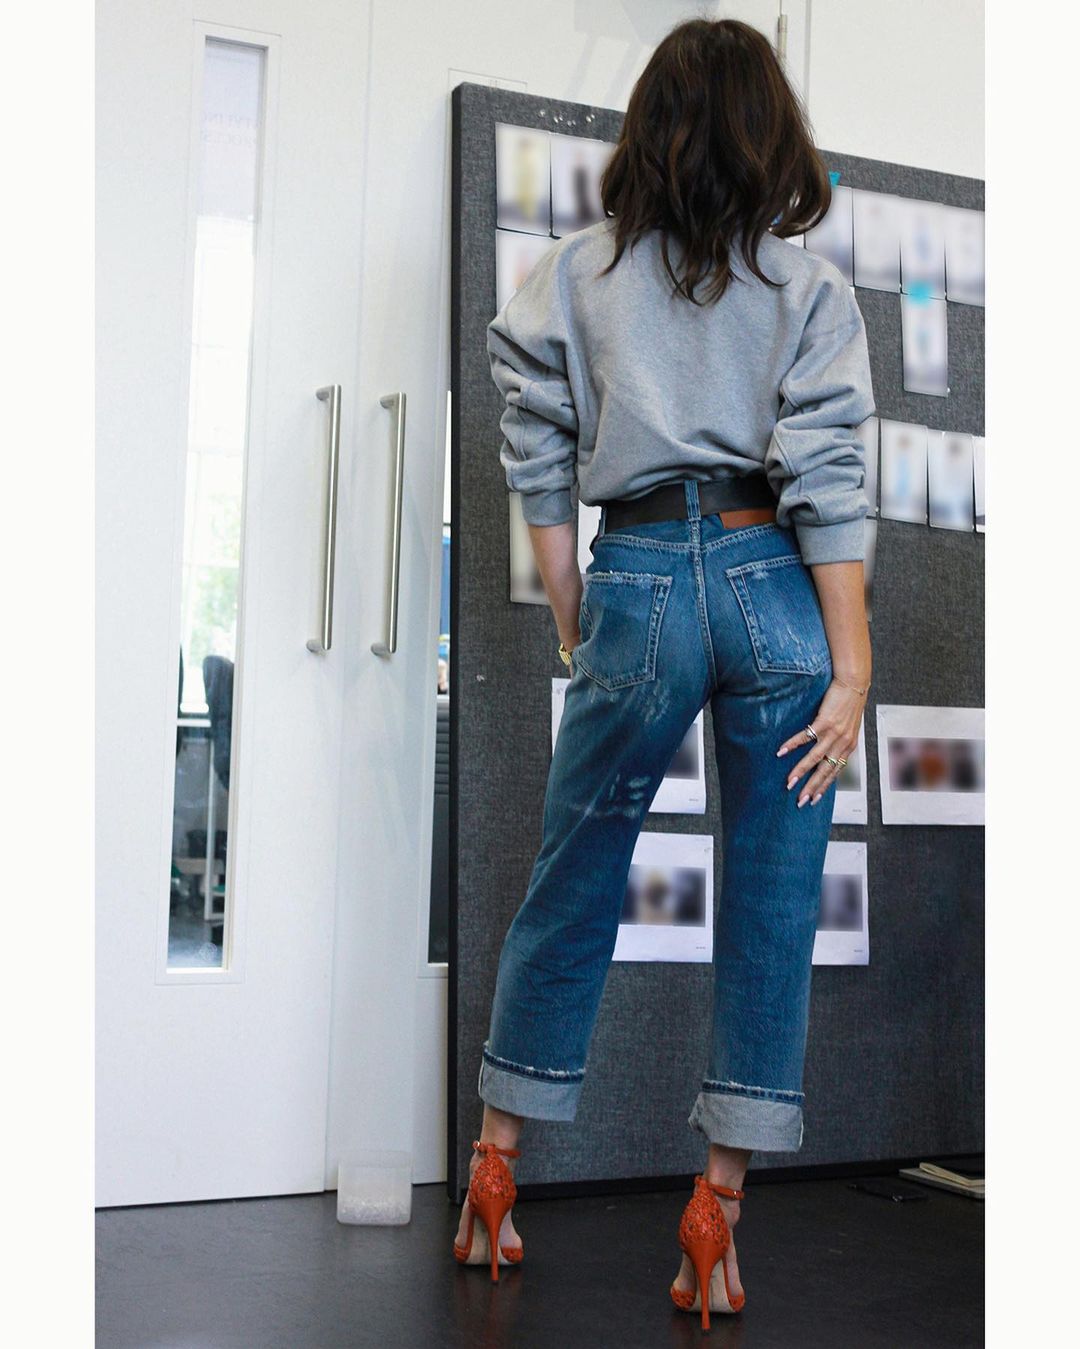 Victoria Beckham jeans and sweatshirt and red heels: